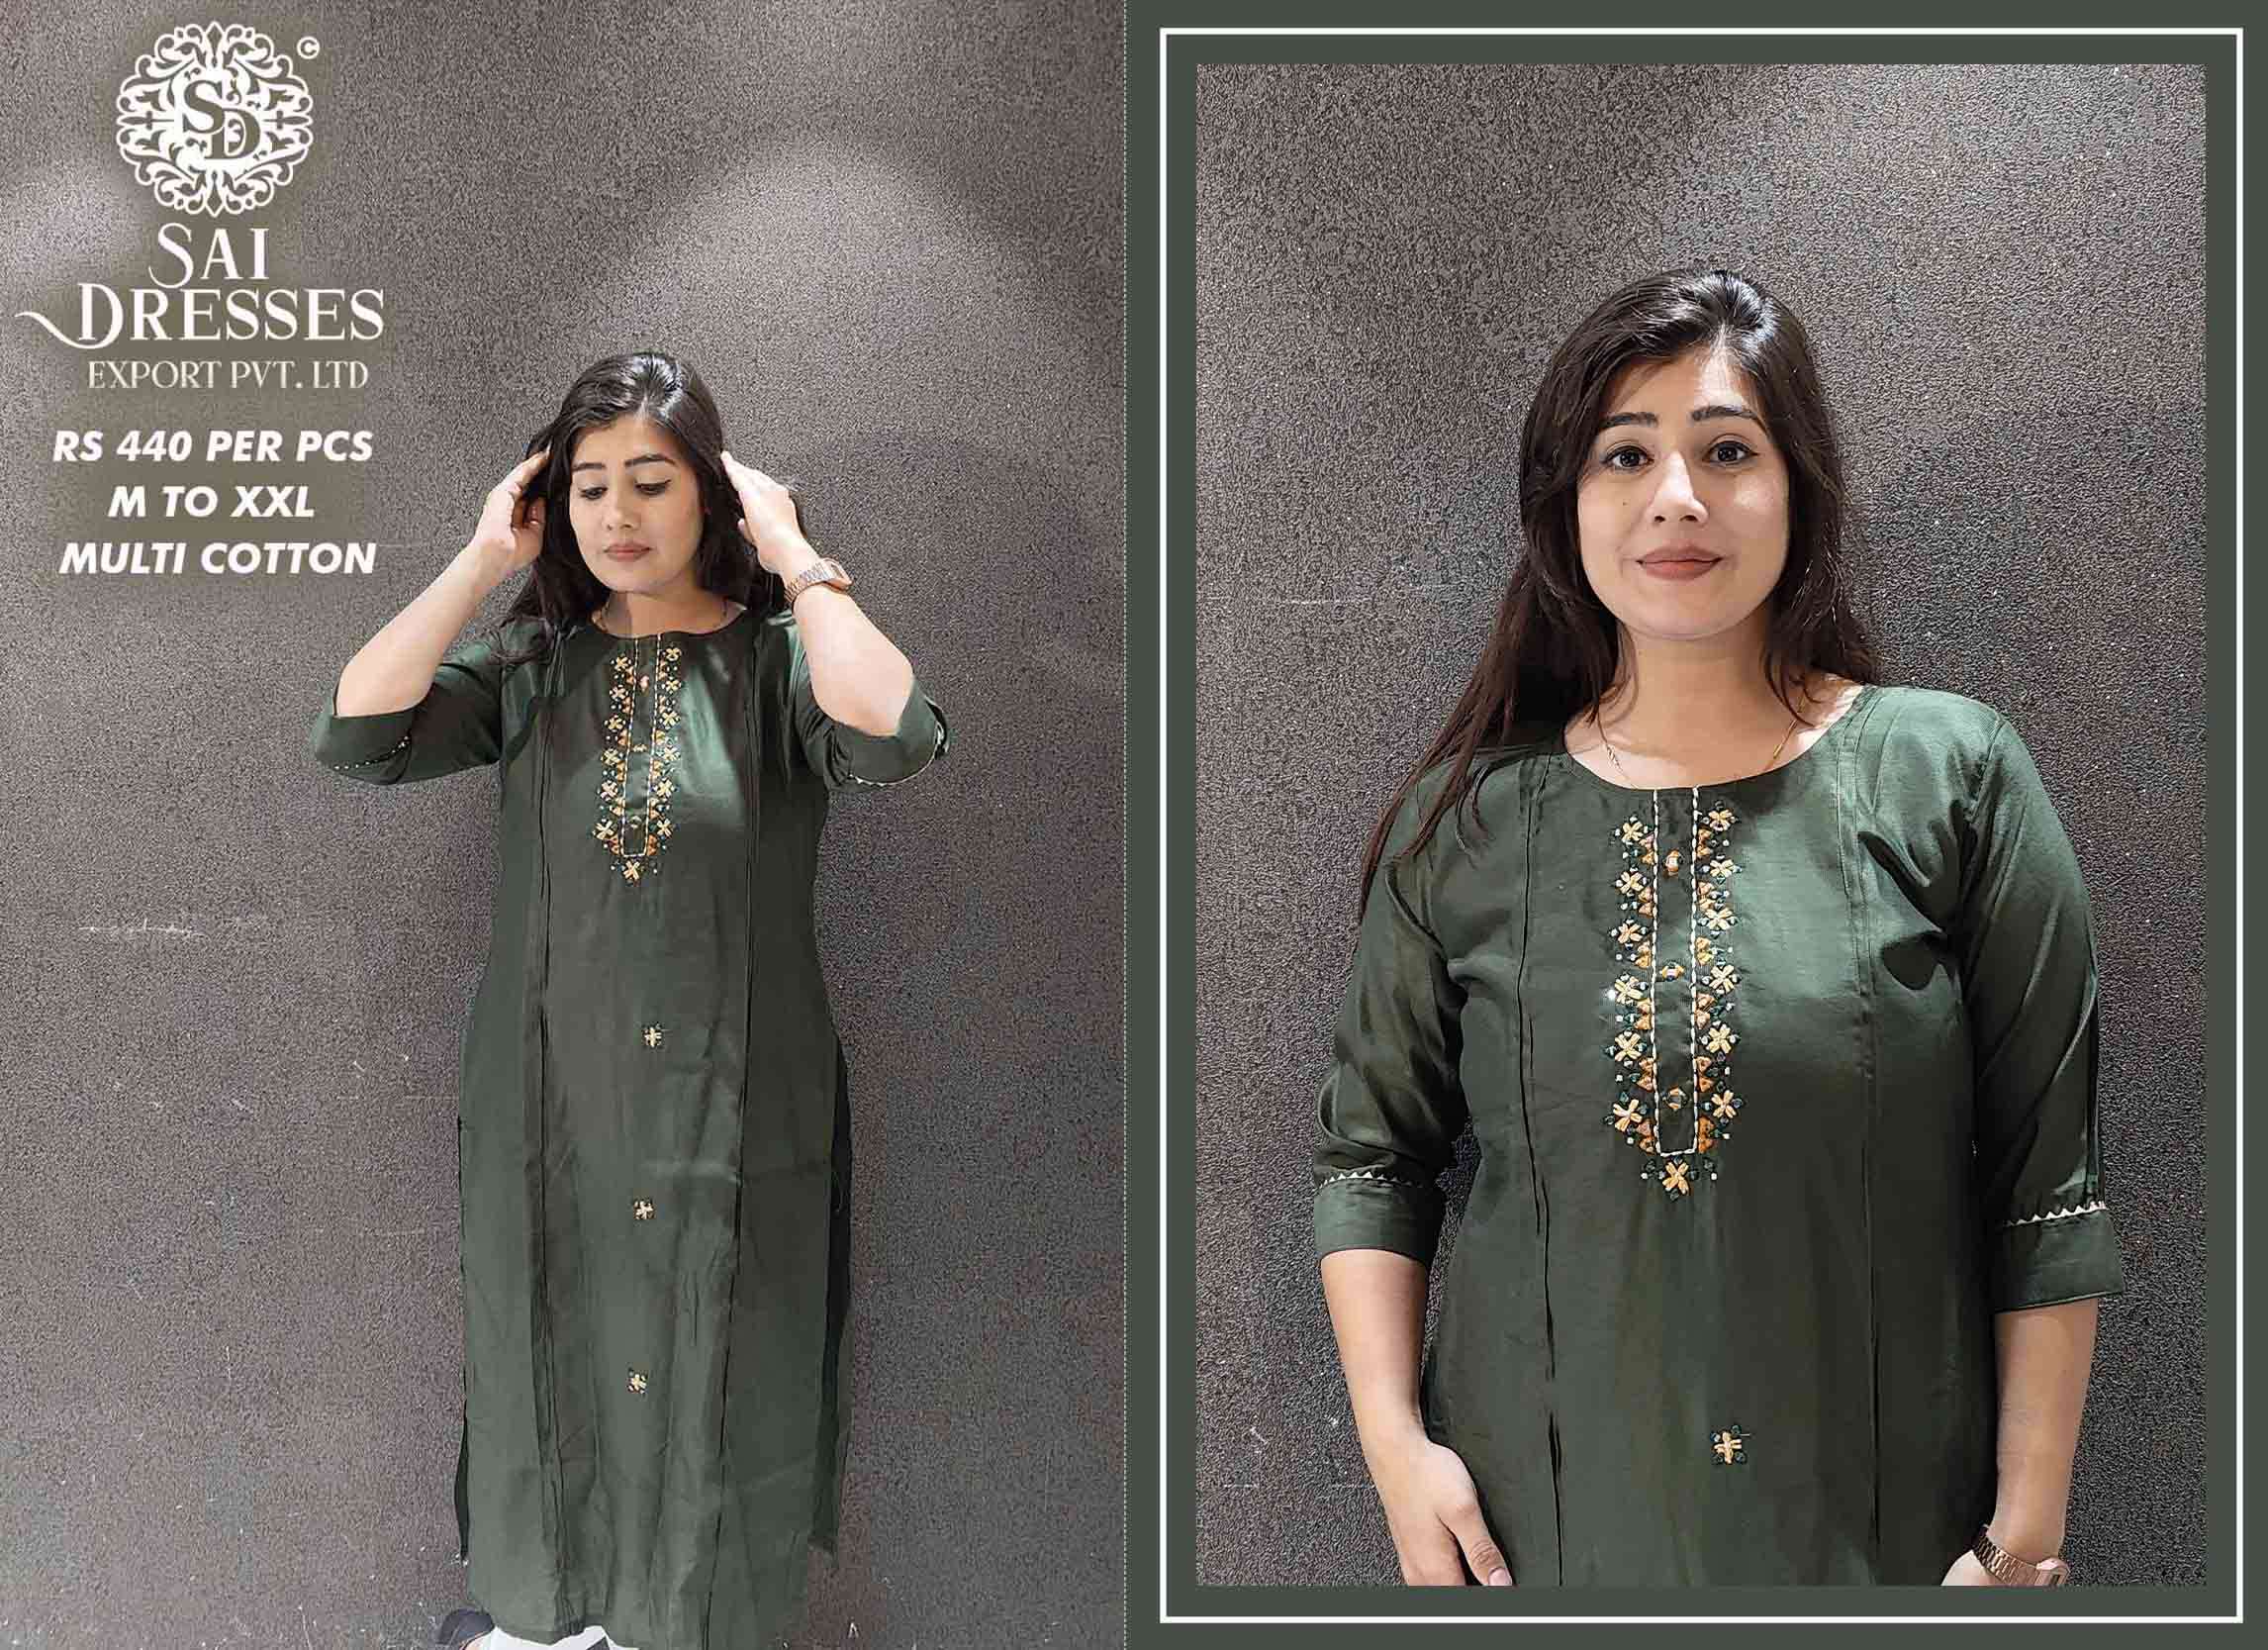 SAI DRESSES PRESENT D.NO SD58 READY TO WEAR EXCLUSIVE HANDWORK KURTI COMBO COLLECTION IN WHOLESALE RATE IN SURAT